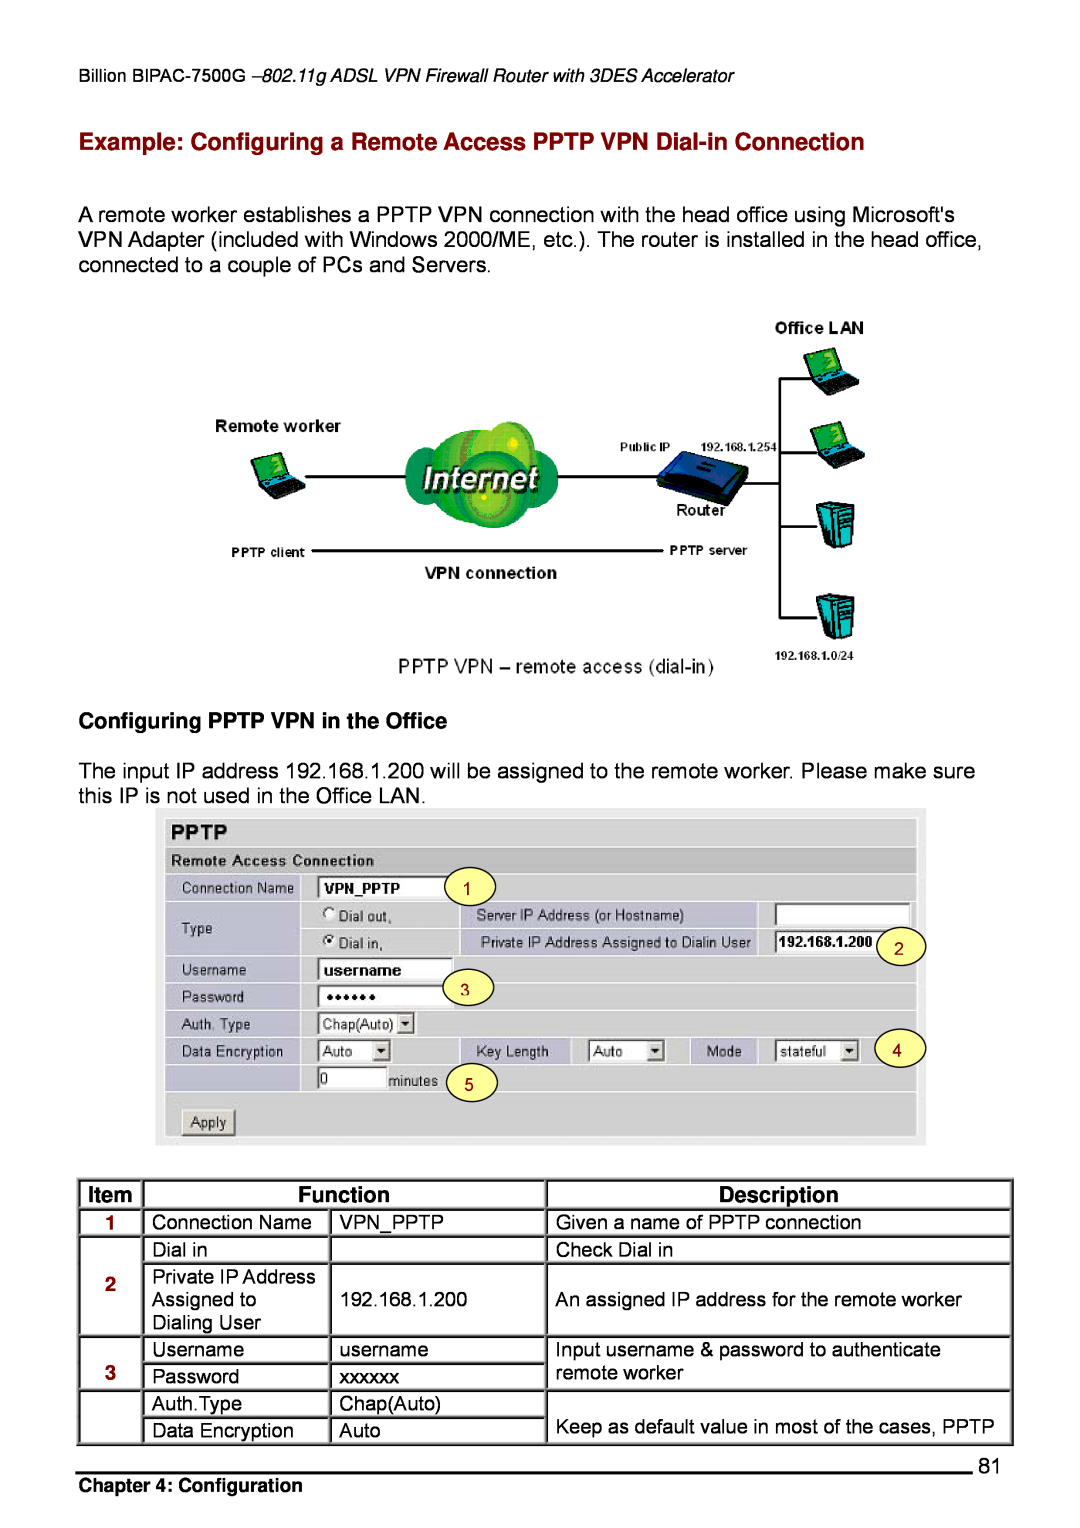 Billion Electric Company BIPAC-7500G user manual Example Configuring a Remote Access PPTP VPN Dial-in Connection, Function 